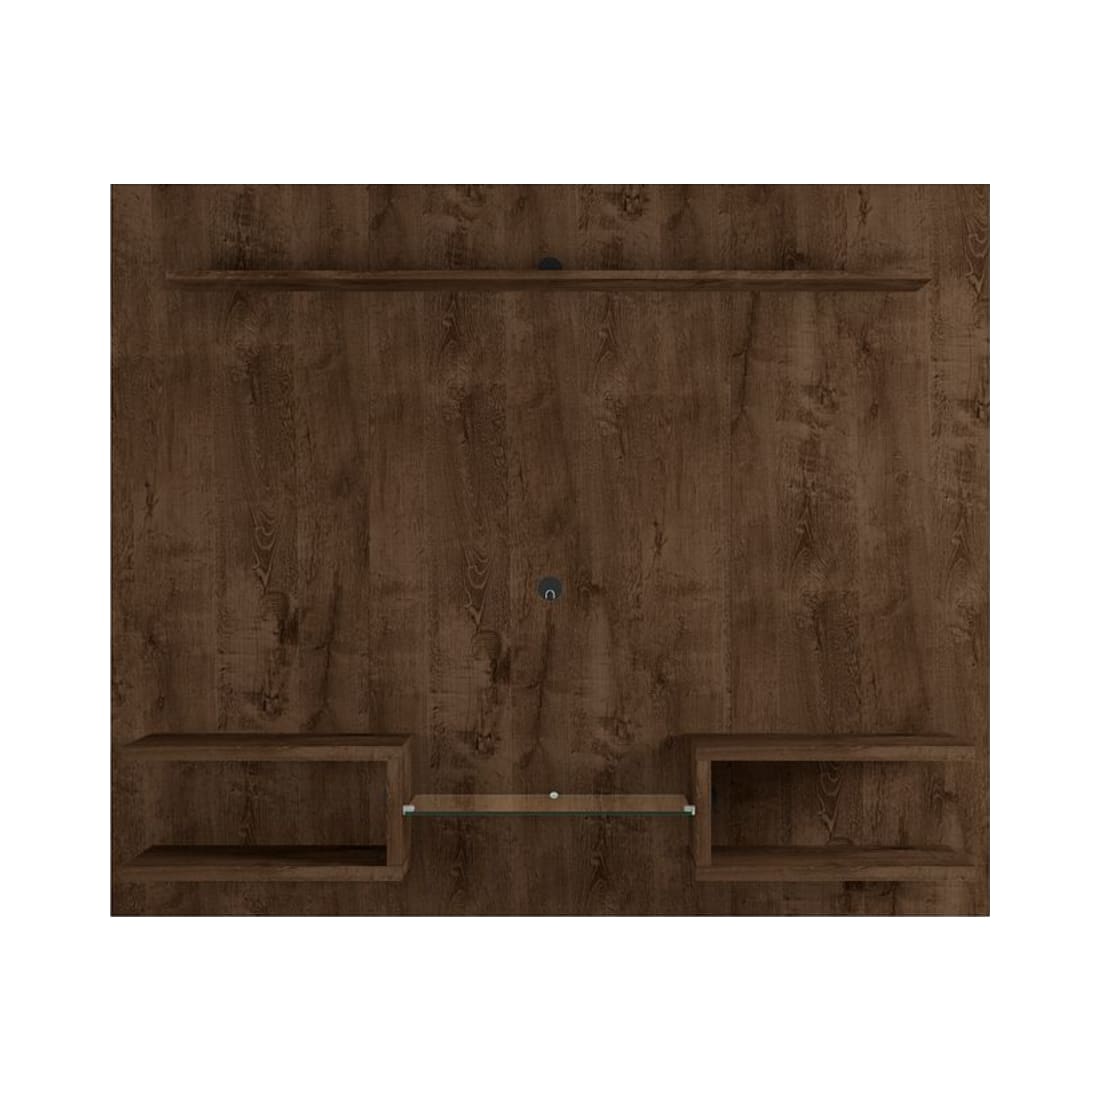 Plaza 64.25” Floating Entertainment Center in Rustic Brown